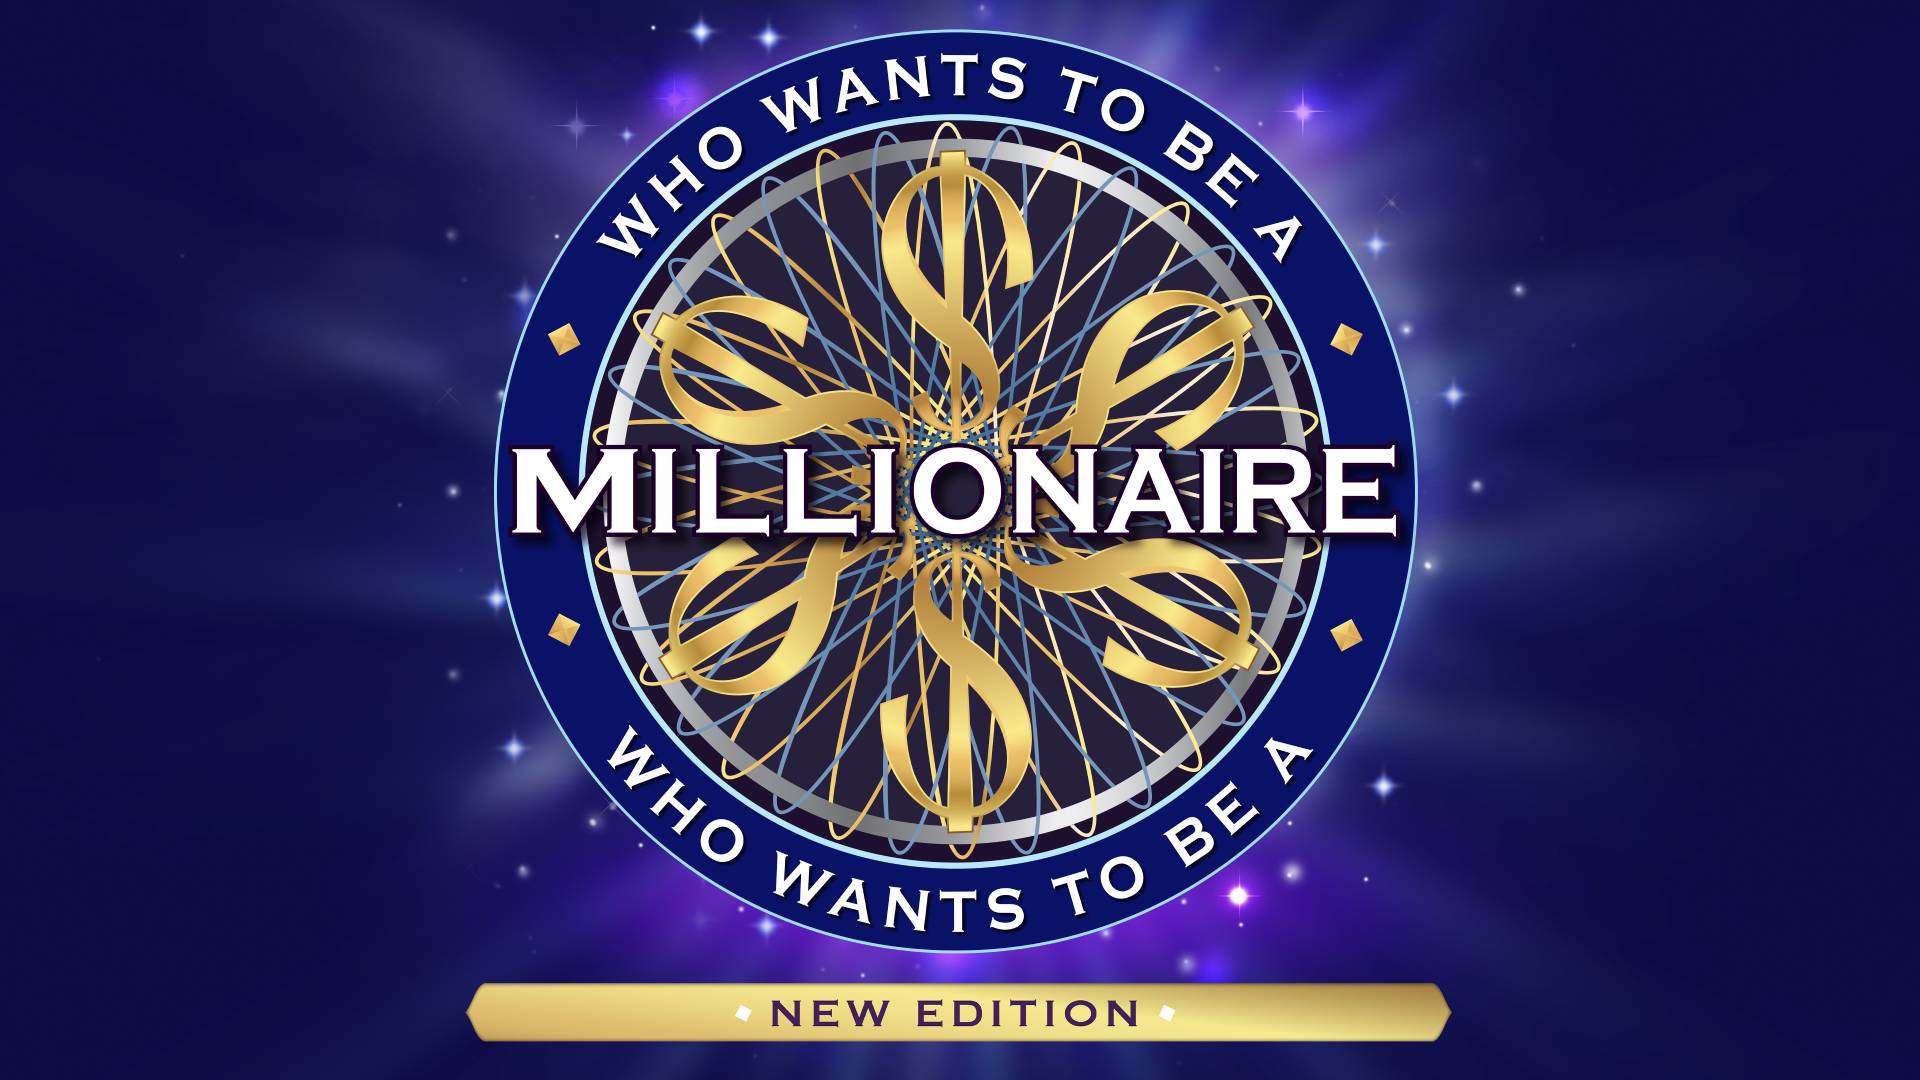 Who Wants to Be a Millionaire? – New Edition